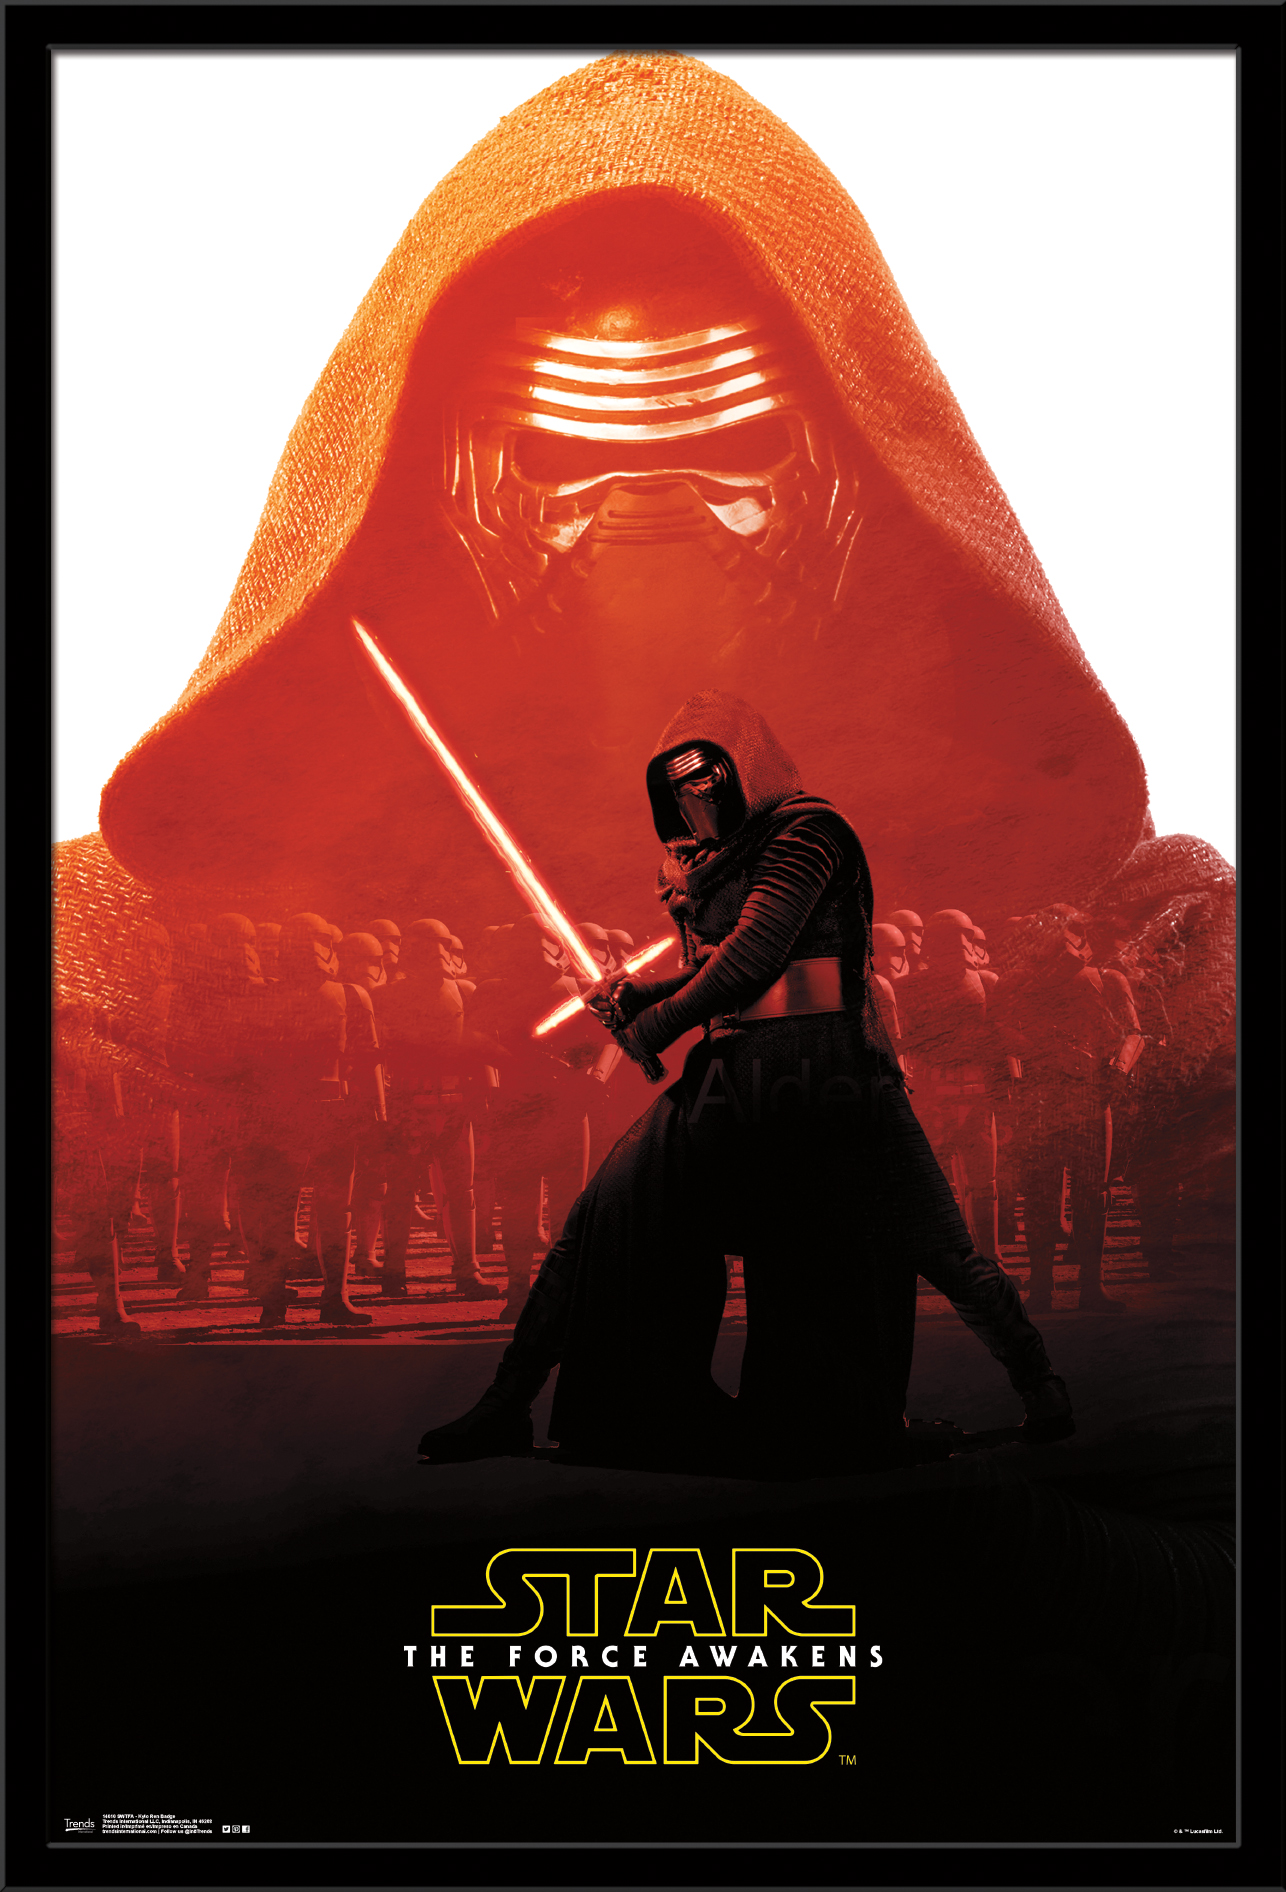 Star Wars: The Force Awakens - Kylo Ren Badge Wall Poster, 22.375" x 34", Framed - image 1 of 2